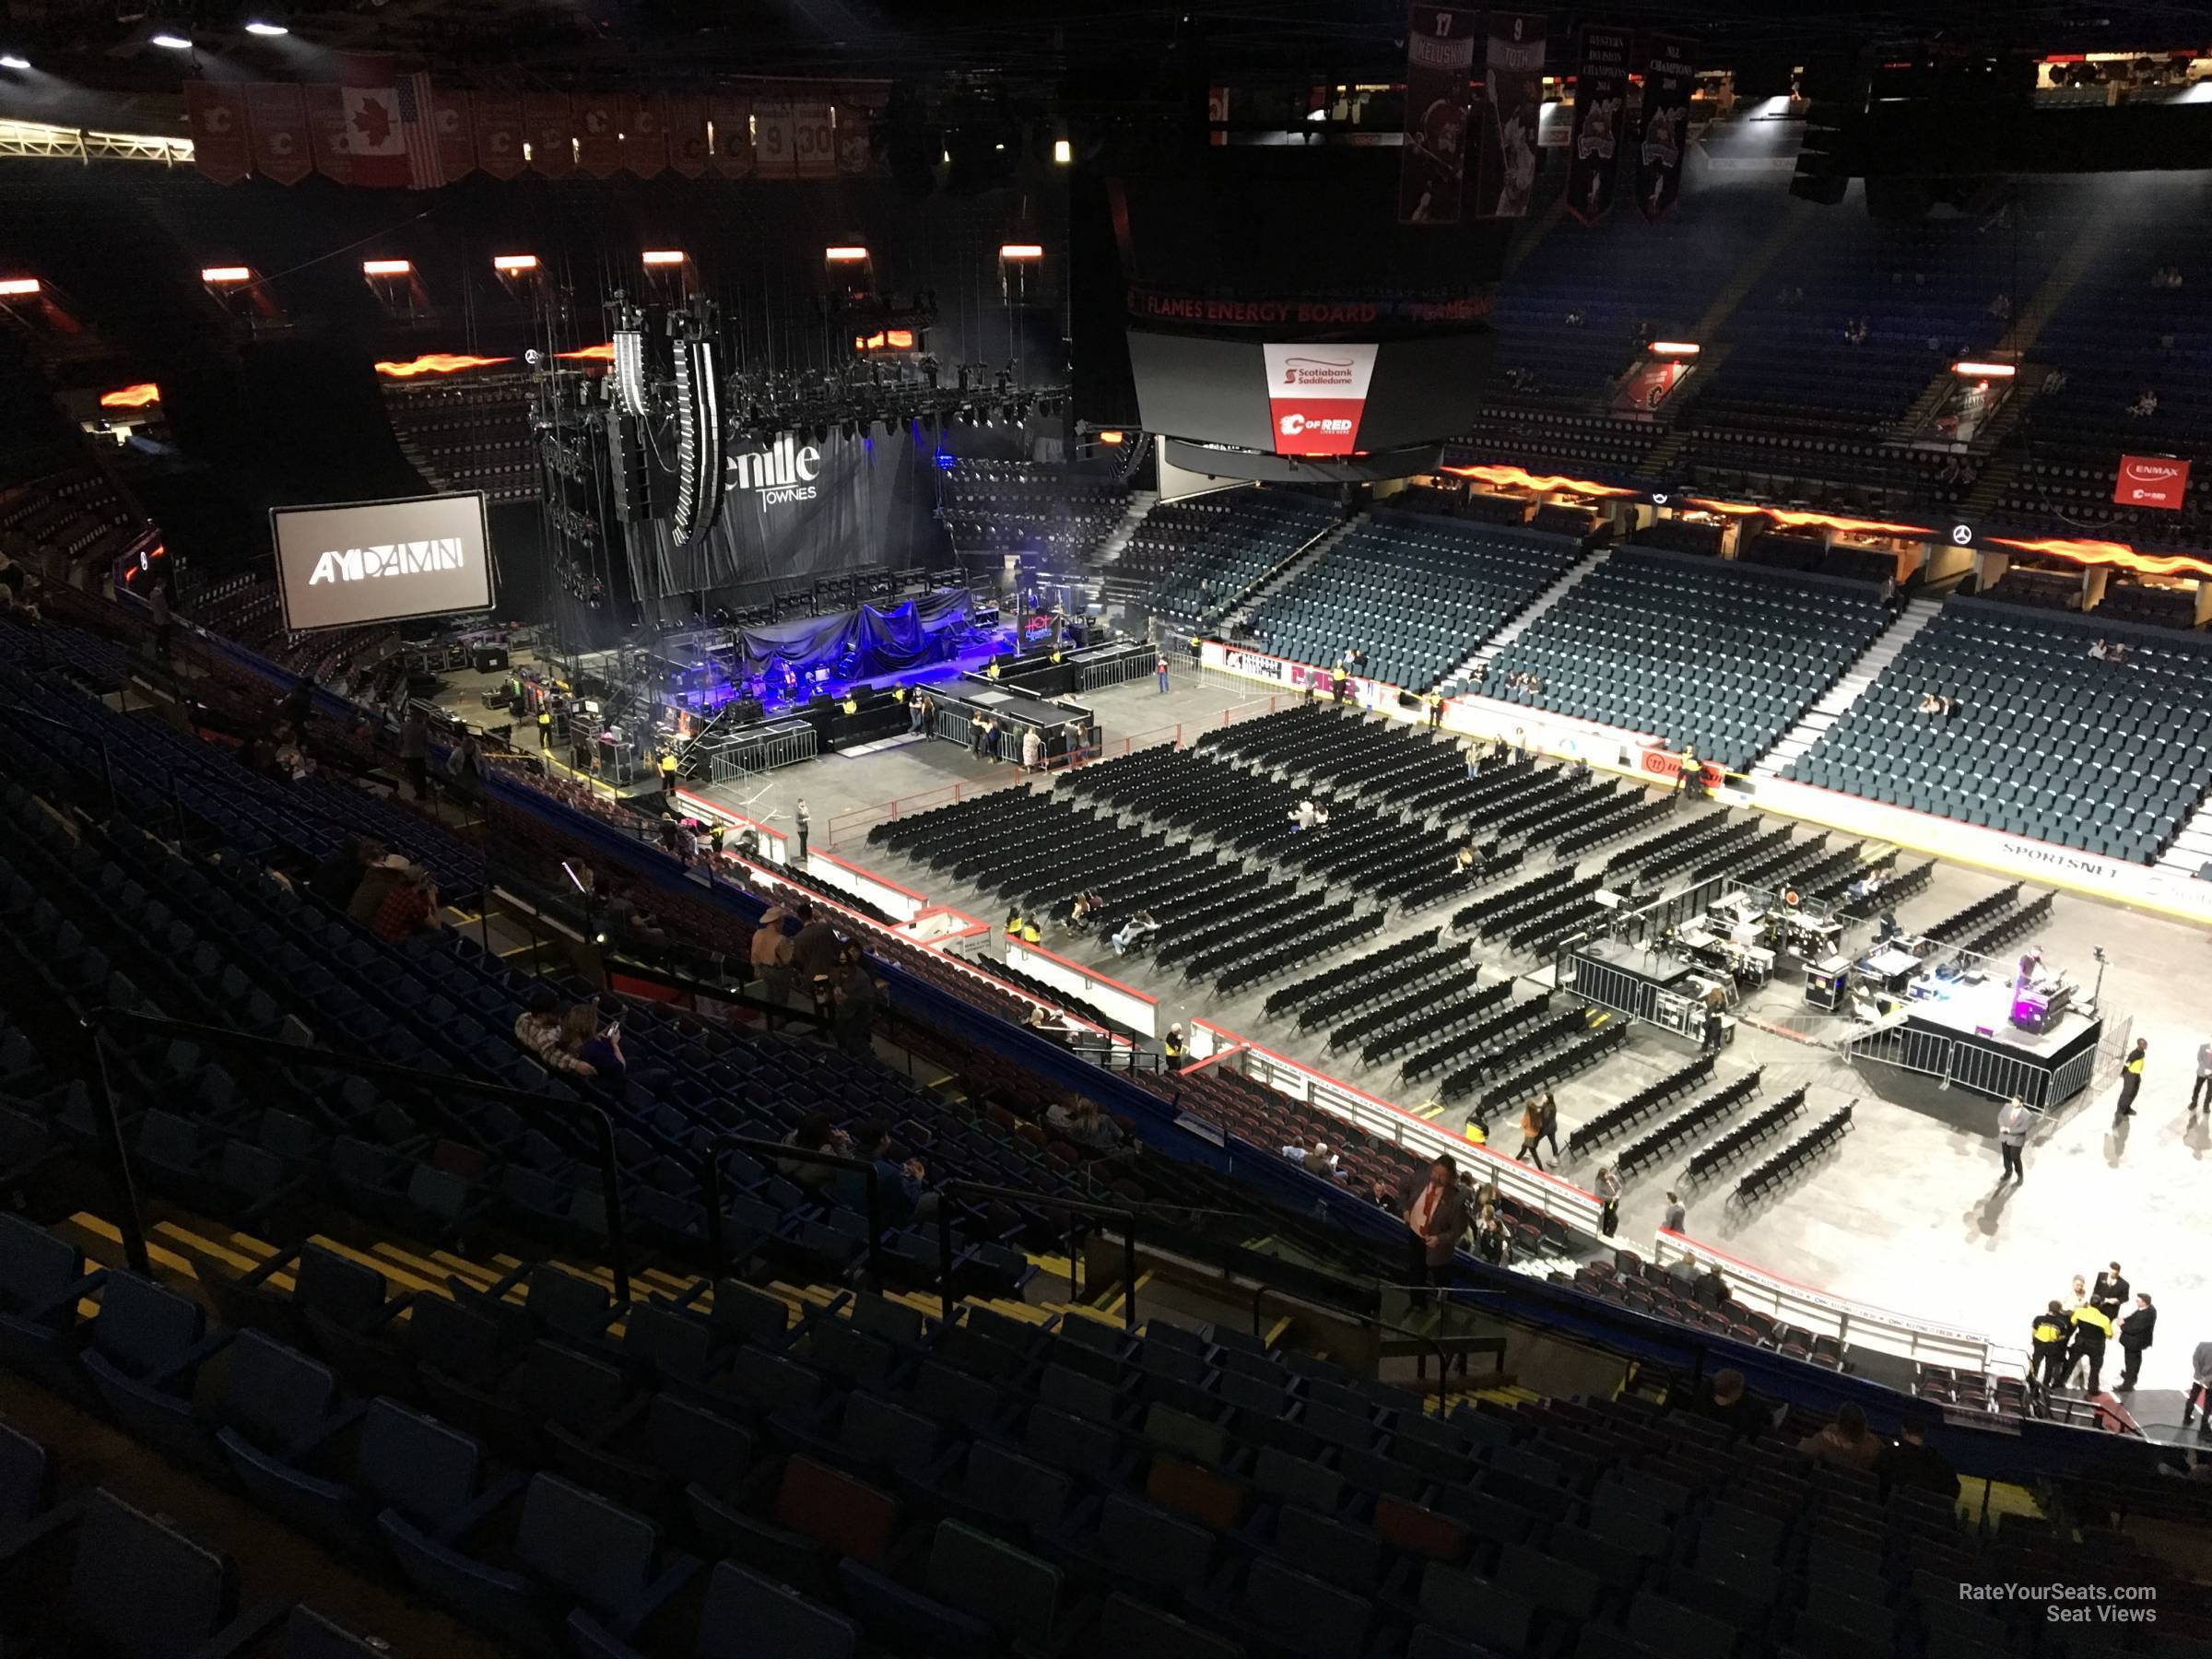 section 215, row 24 seat view  for concert - scotiabank saddledome